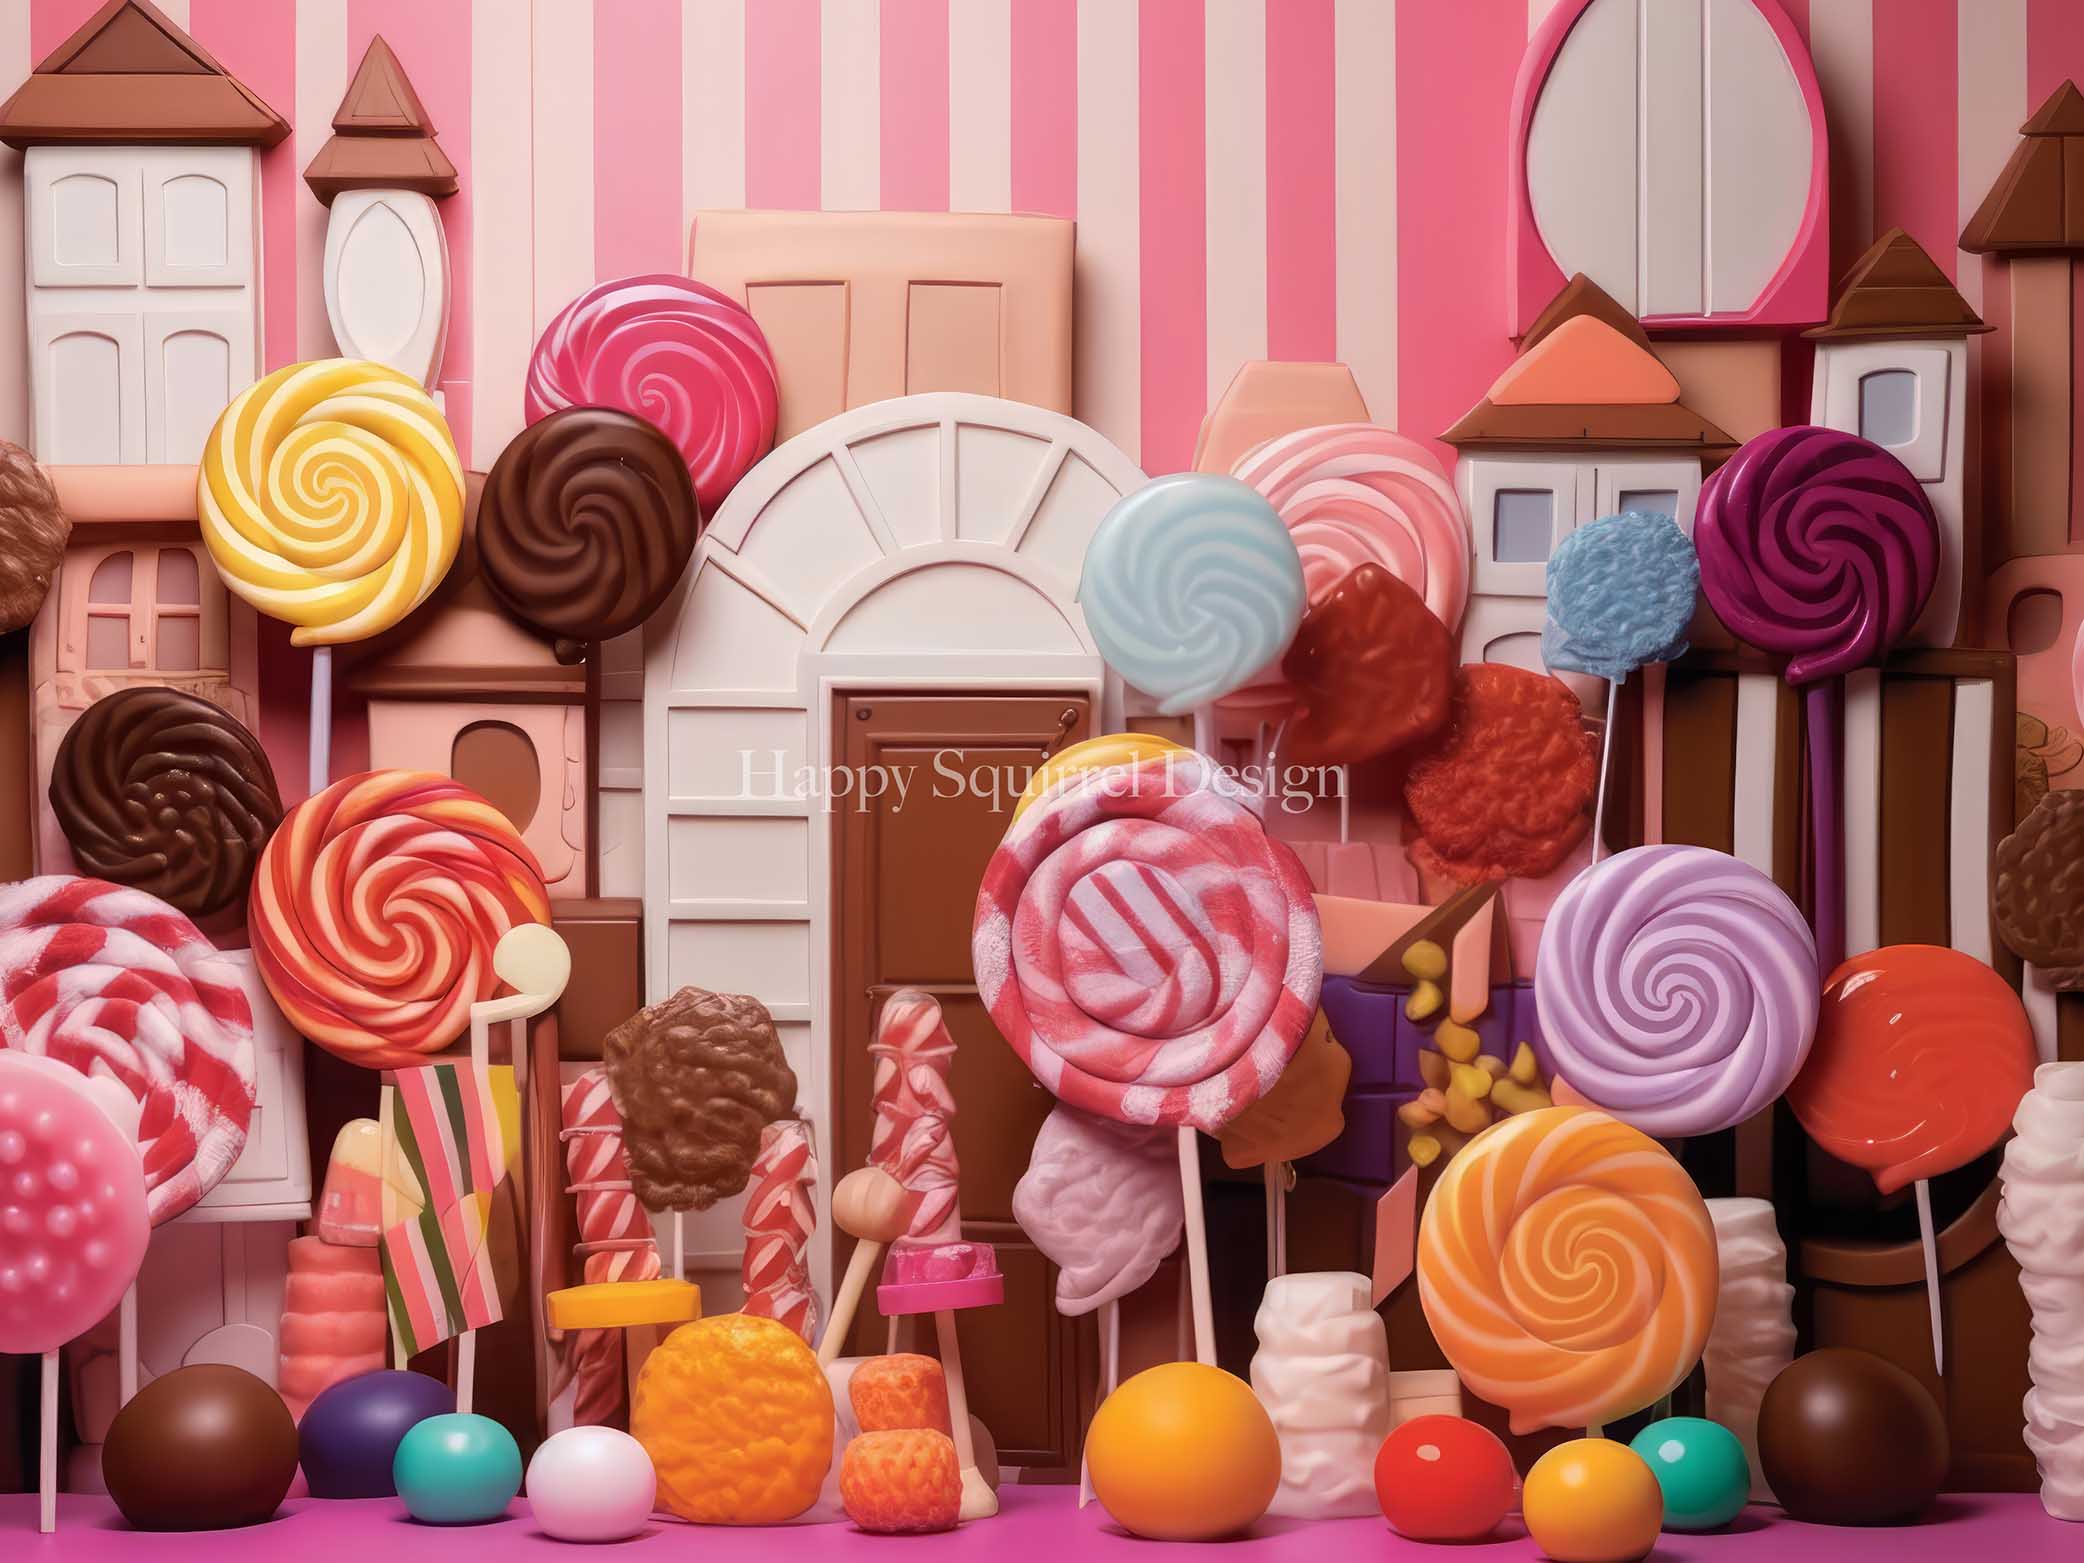 Kate Lollipop Wall Backdrop Designed by Happy Squirrel Design